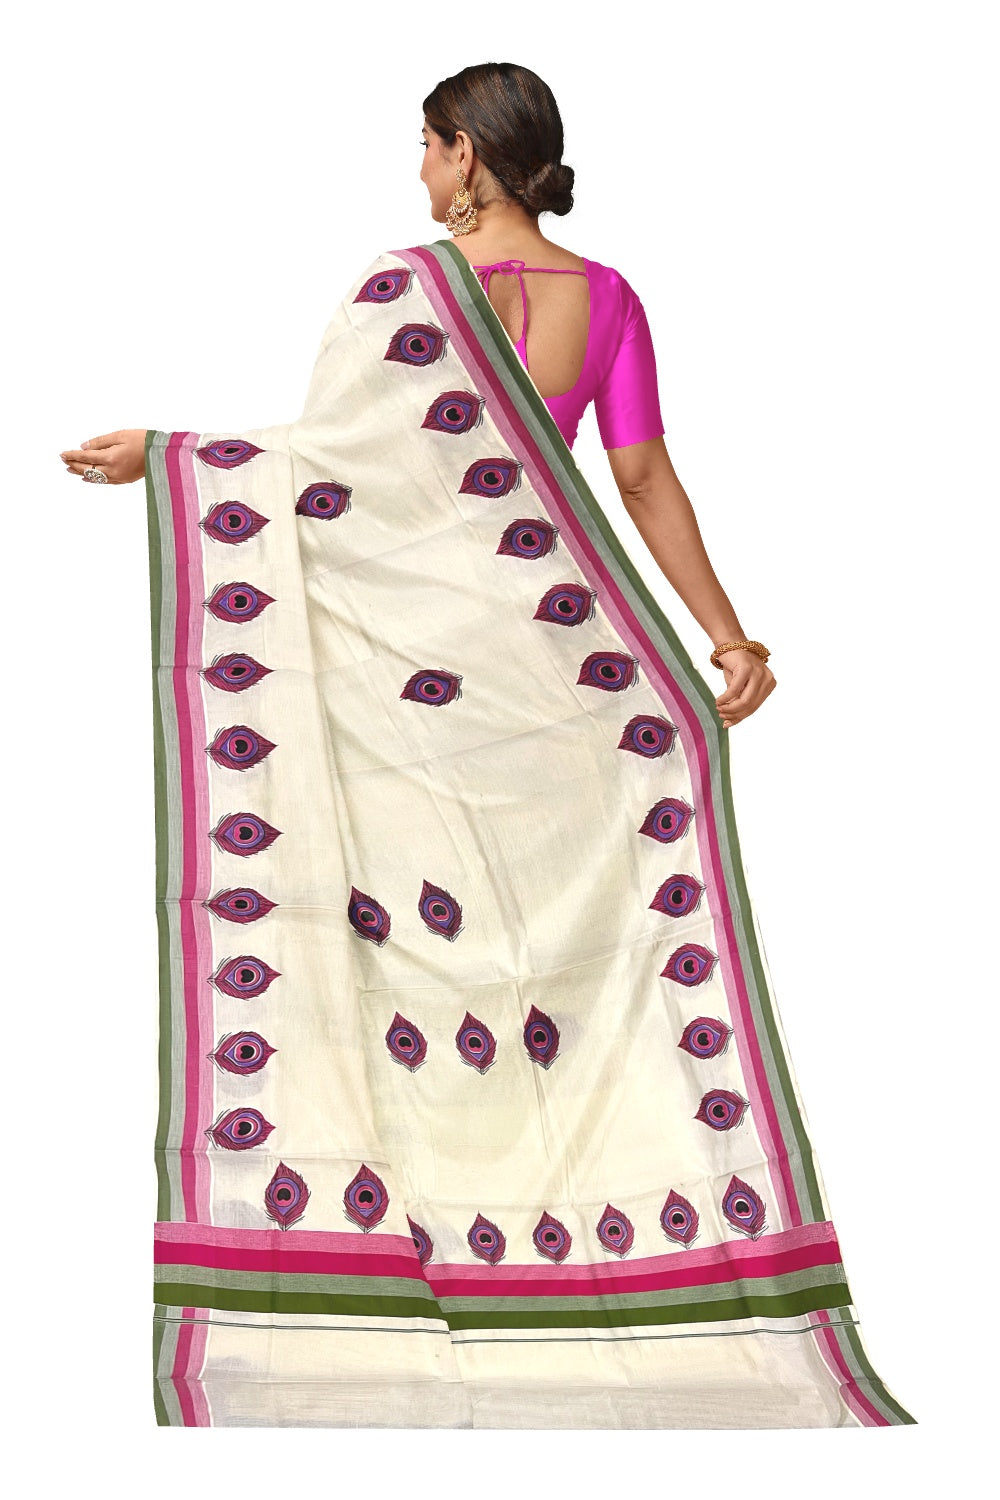 Kerala Cotton Saree with Pink Peacock Feather Mural Printed and Multi Colour Border